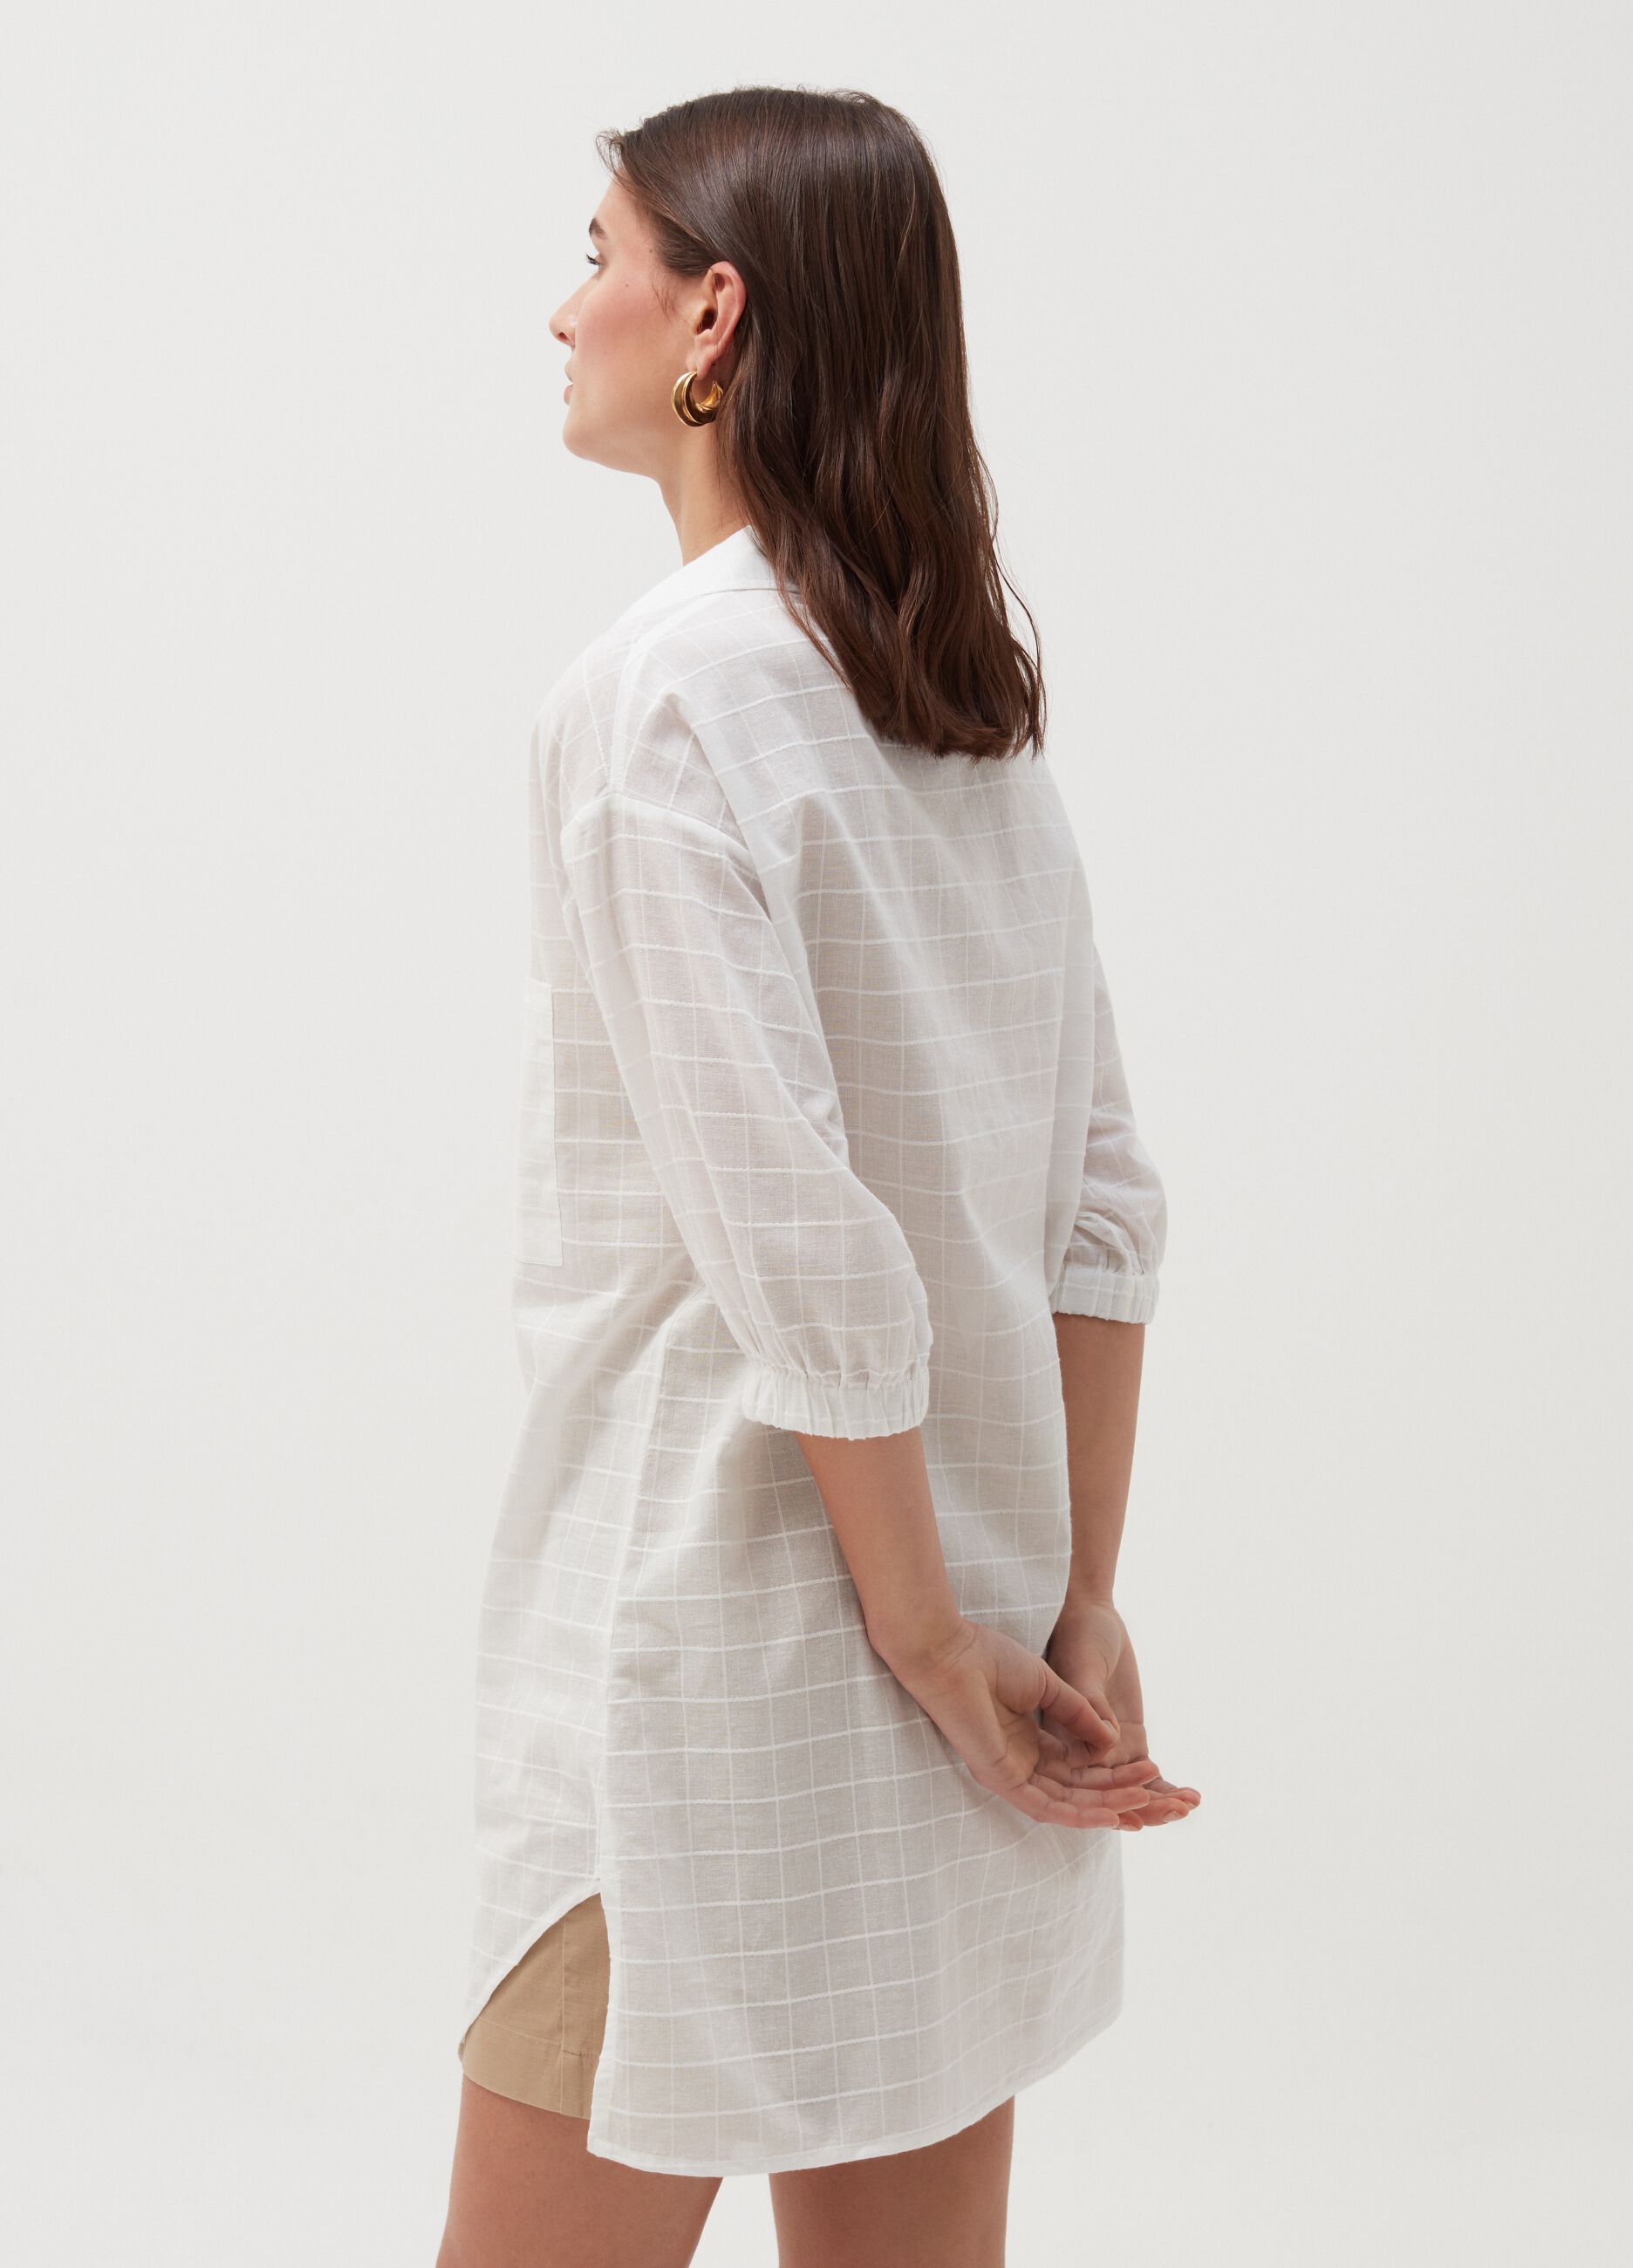 Beach cover-up shirt in cotton with check weave